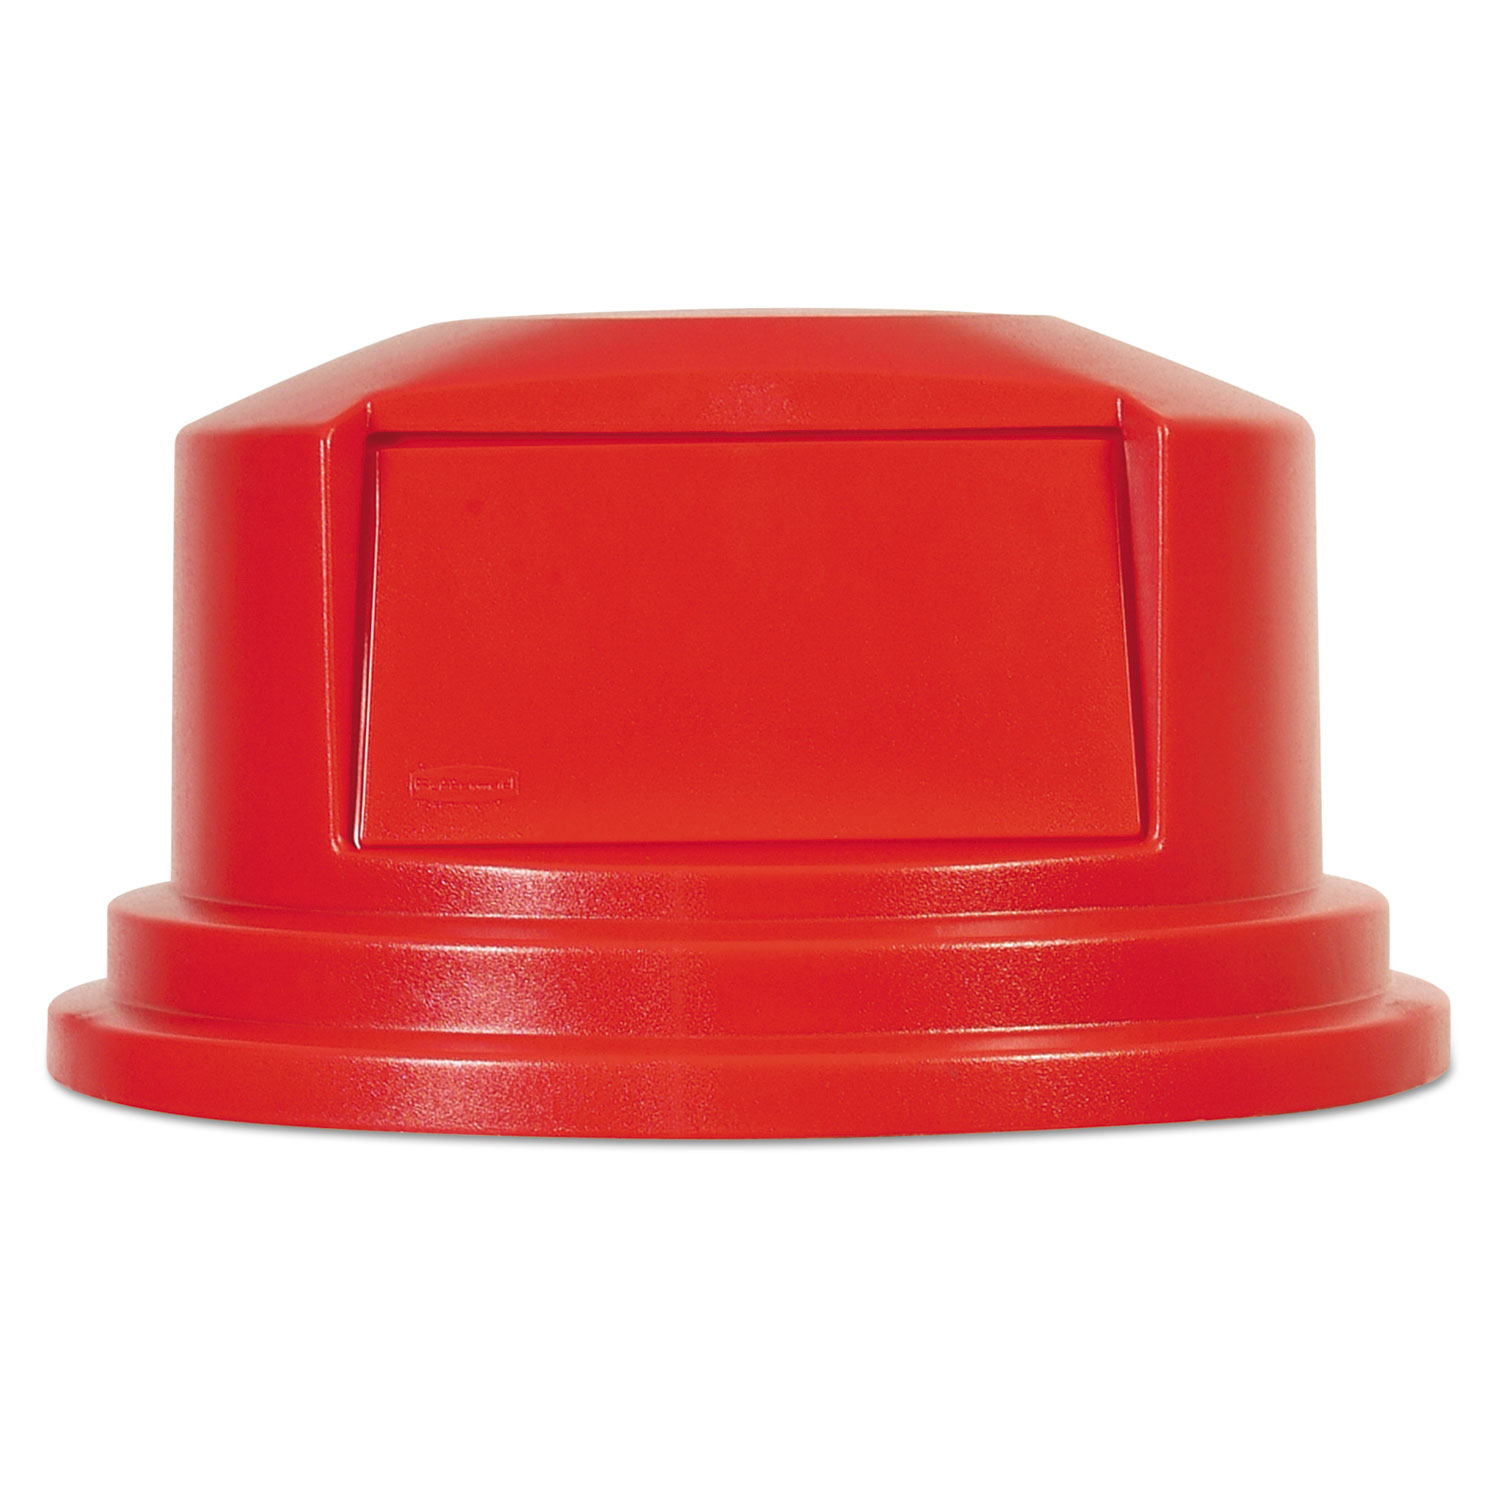  Rubbermaid Commercial FG265788RED Round BRUTE Dome Top Lid for 55 gal Waste Containers, 27.25 diameter, Red (RCP265788RED) 